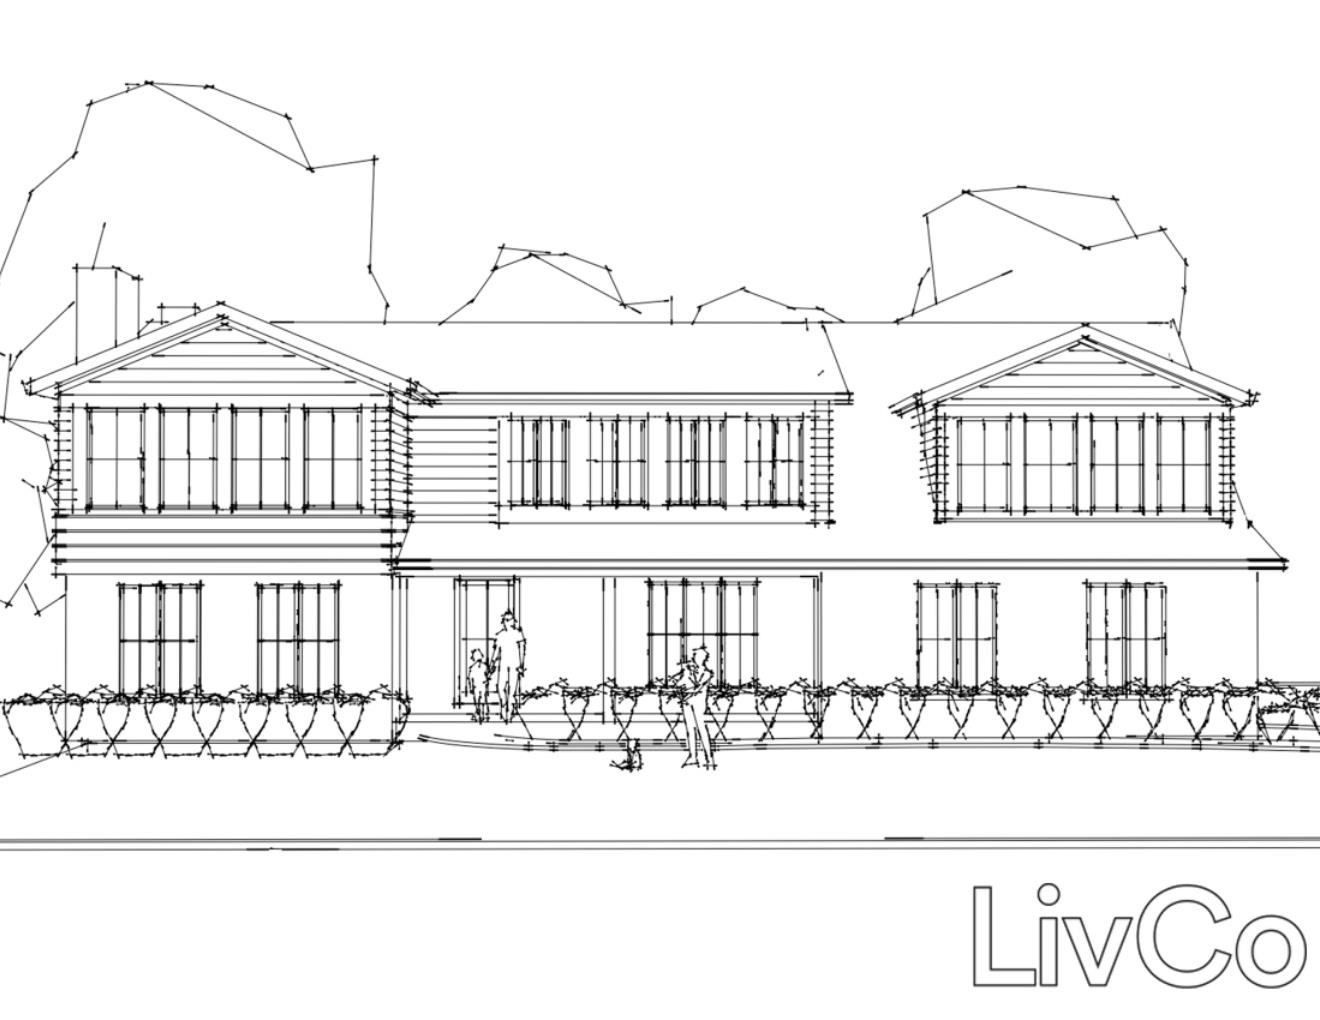 black and white sketch of the exterior elevation of a two story house in Hinsdale Illinois